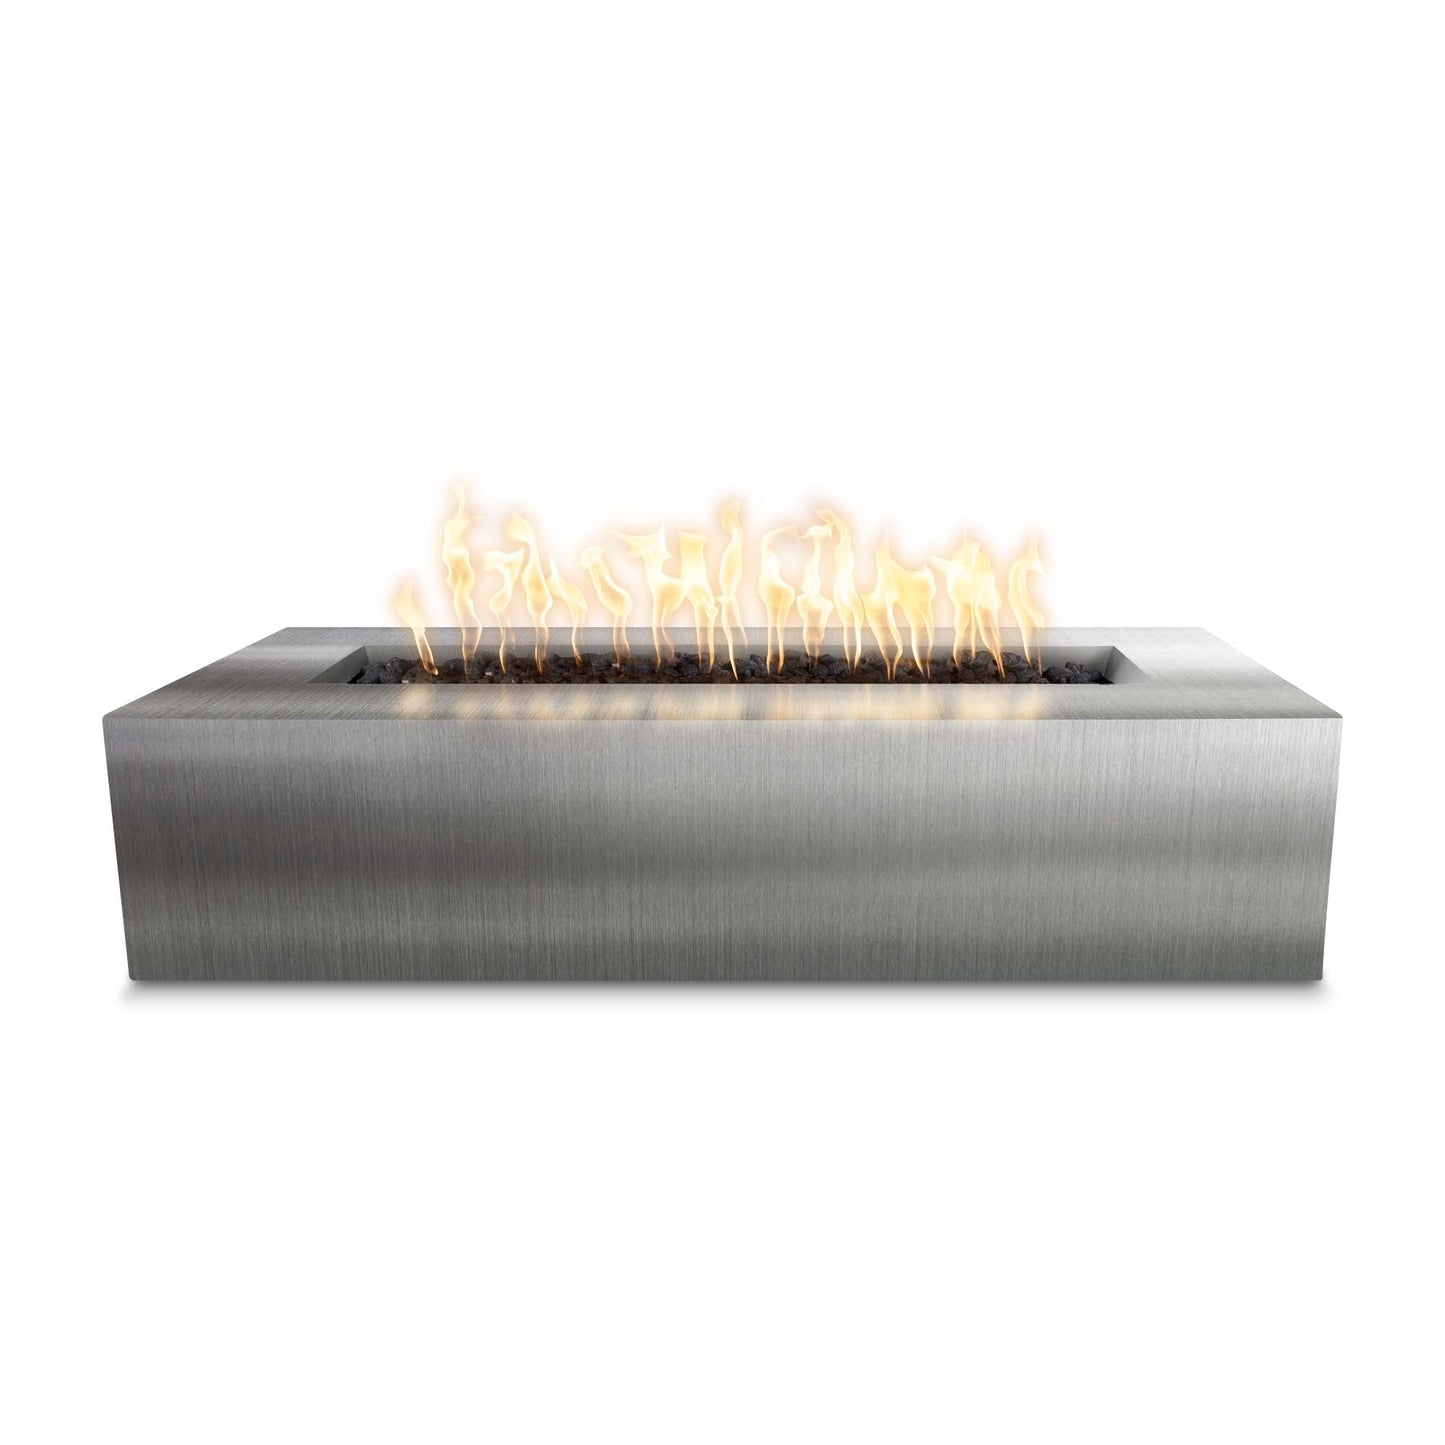 The Outdoor Plus Rectangular Regal 48" Hammered Copper Liquid Propane Fire Pit with Match Lit with Flame Sense Ignition